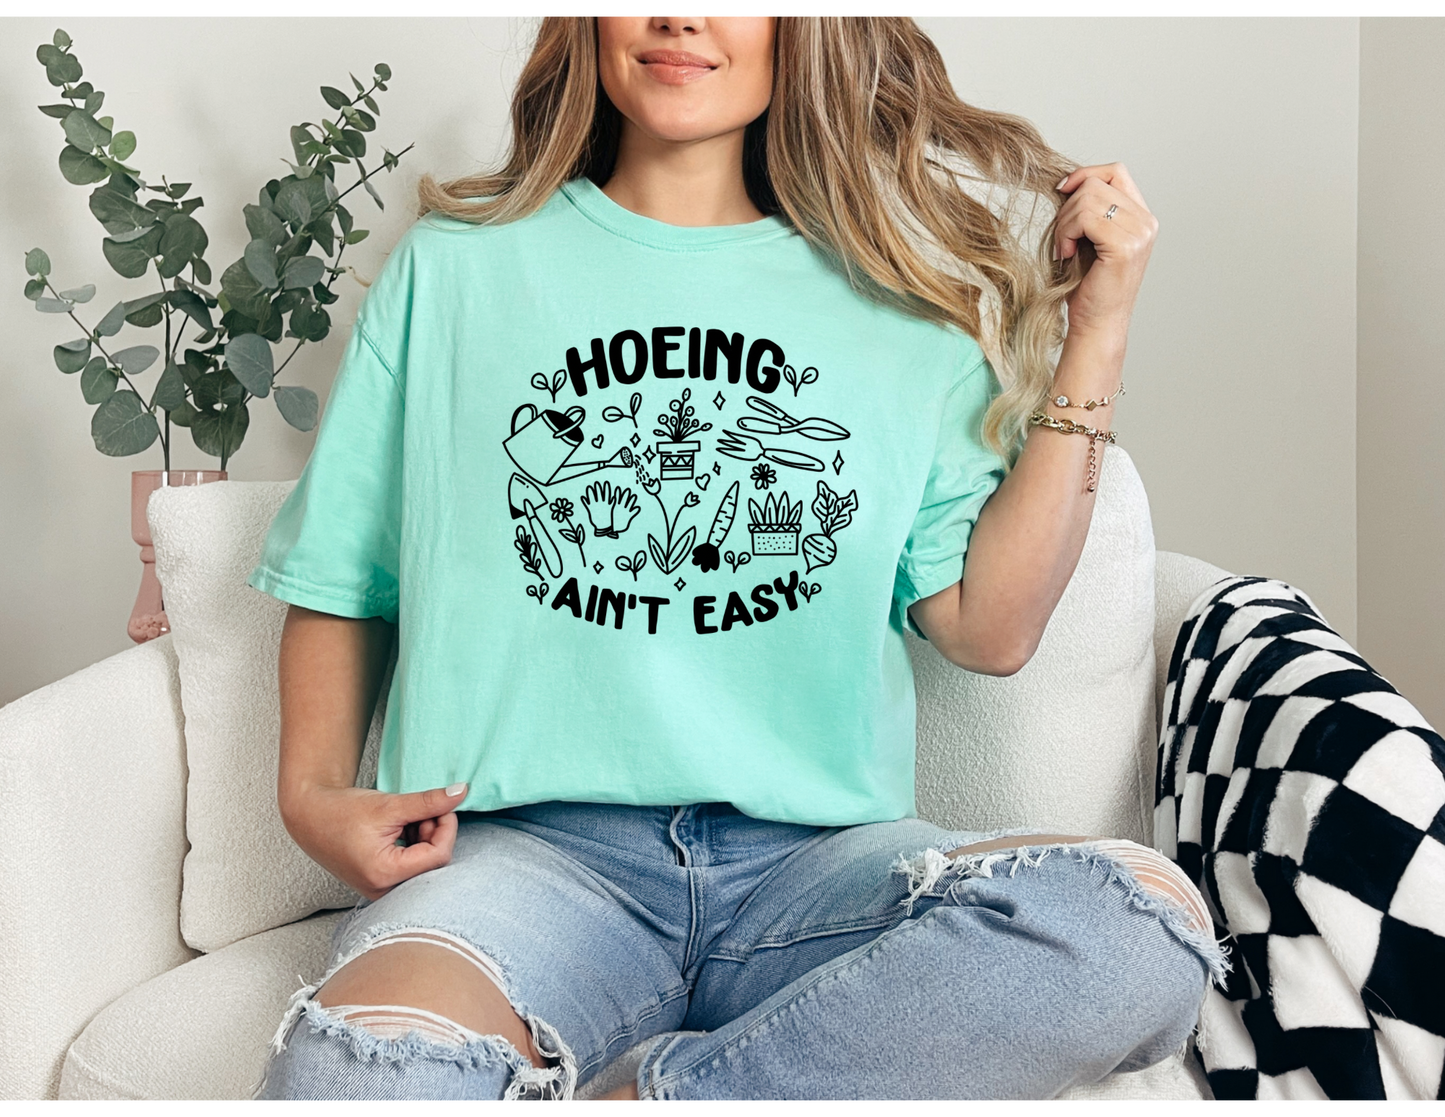 Hoeing Ain’t Easy Shirt